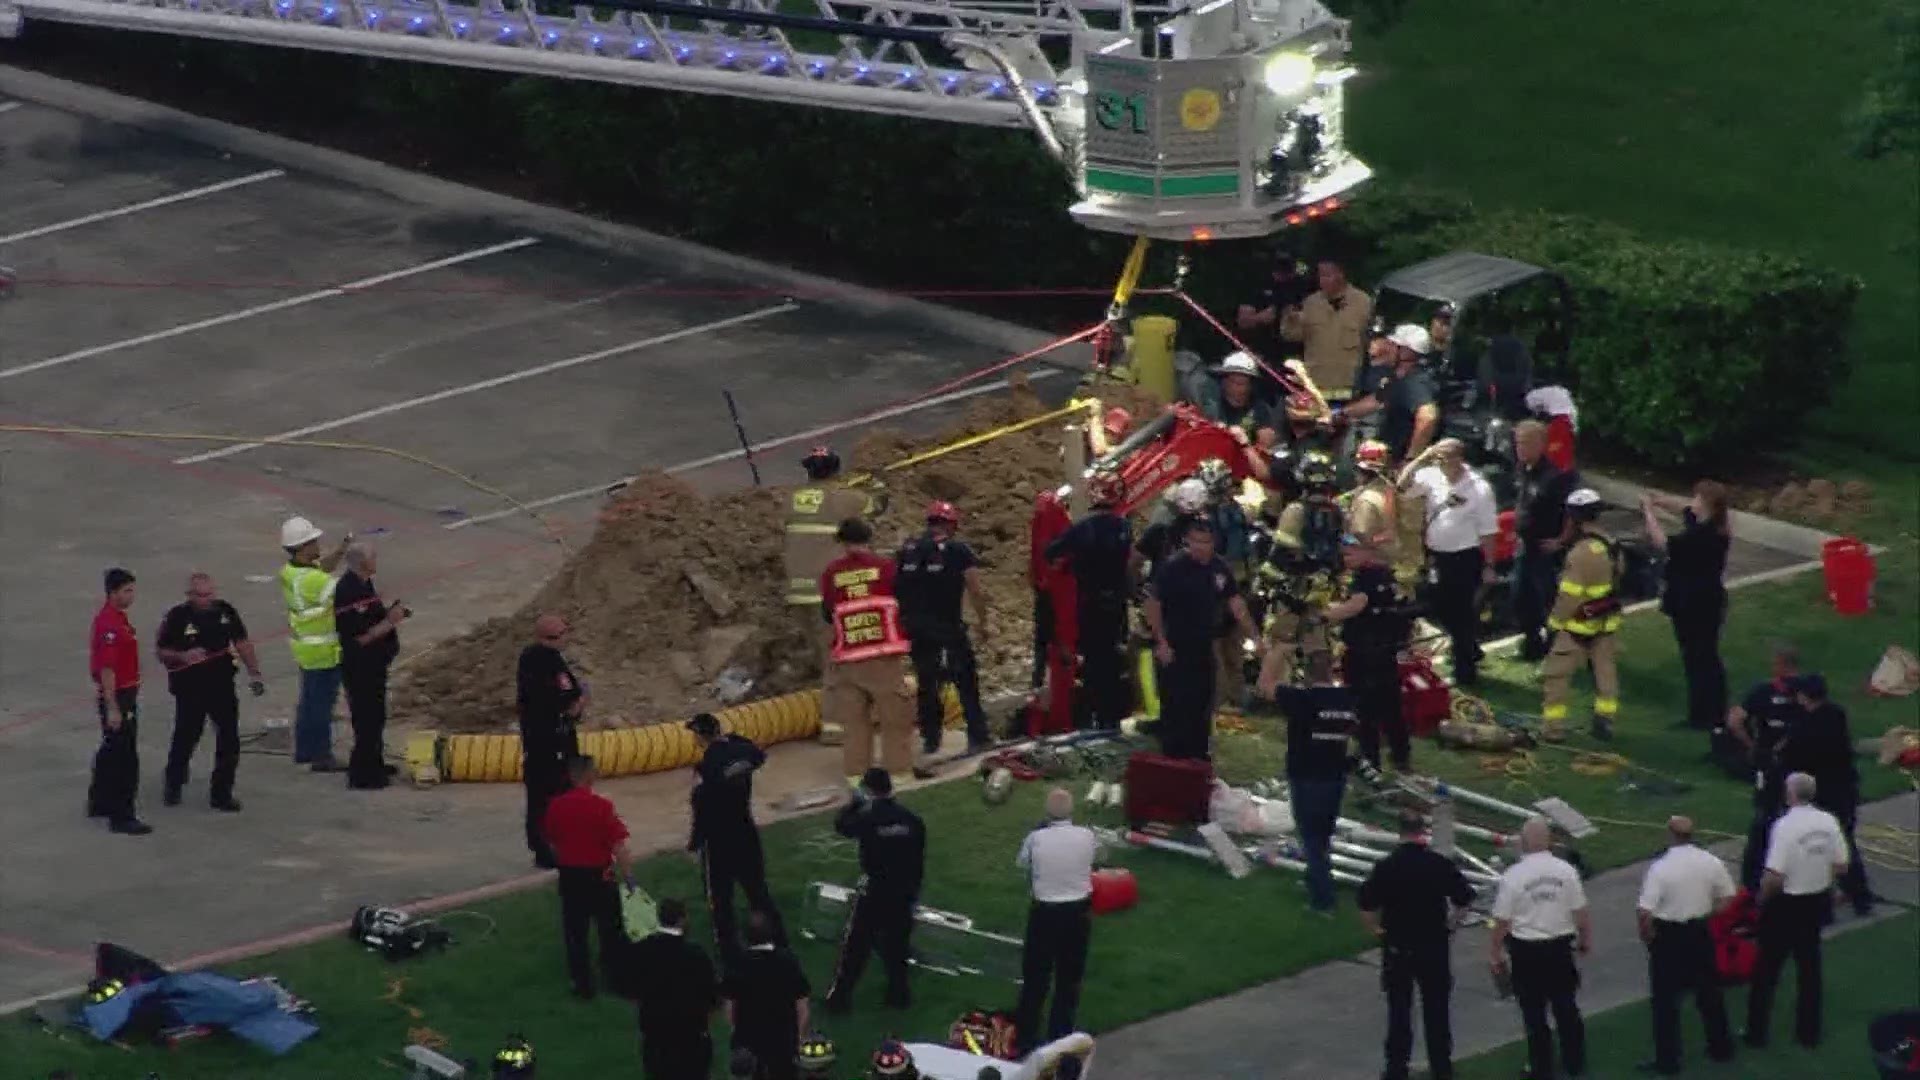 Firefighters rescued a man who was trapped after a trench collapsed Tuesday afternoon in northwest Harris County.